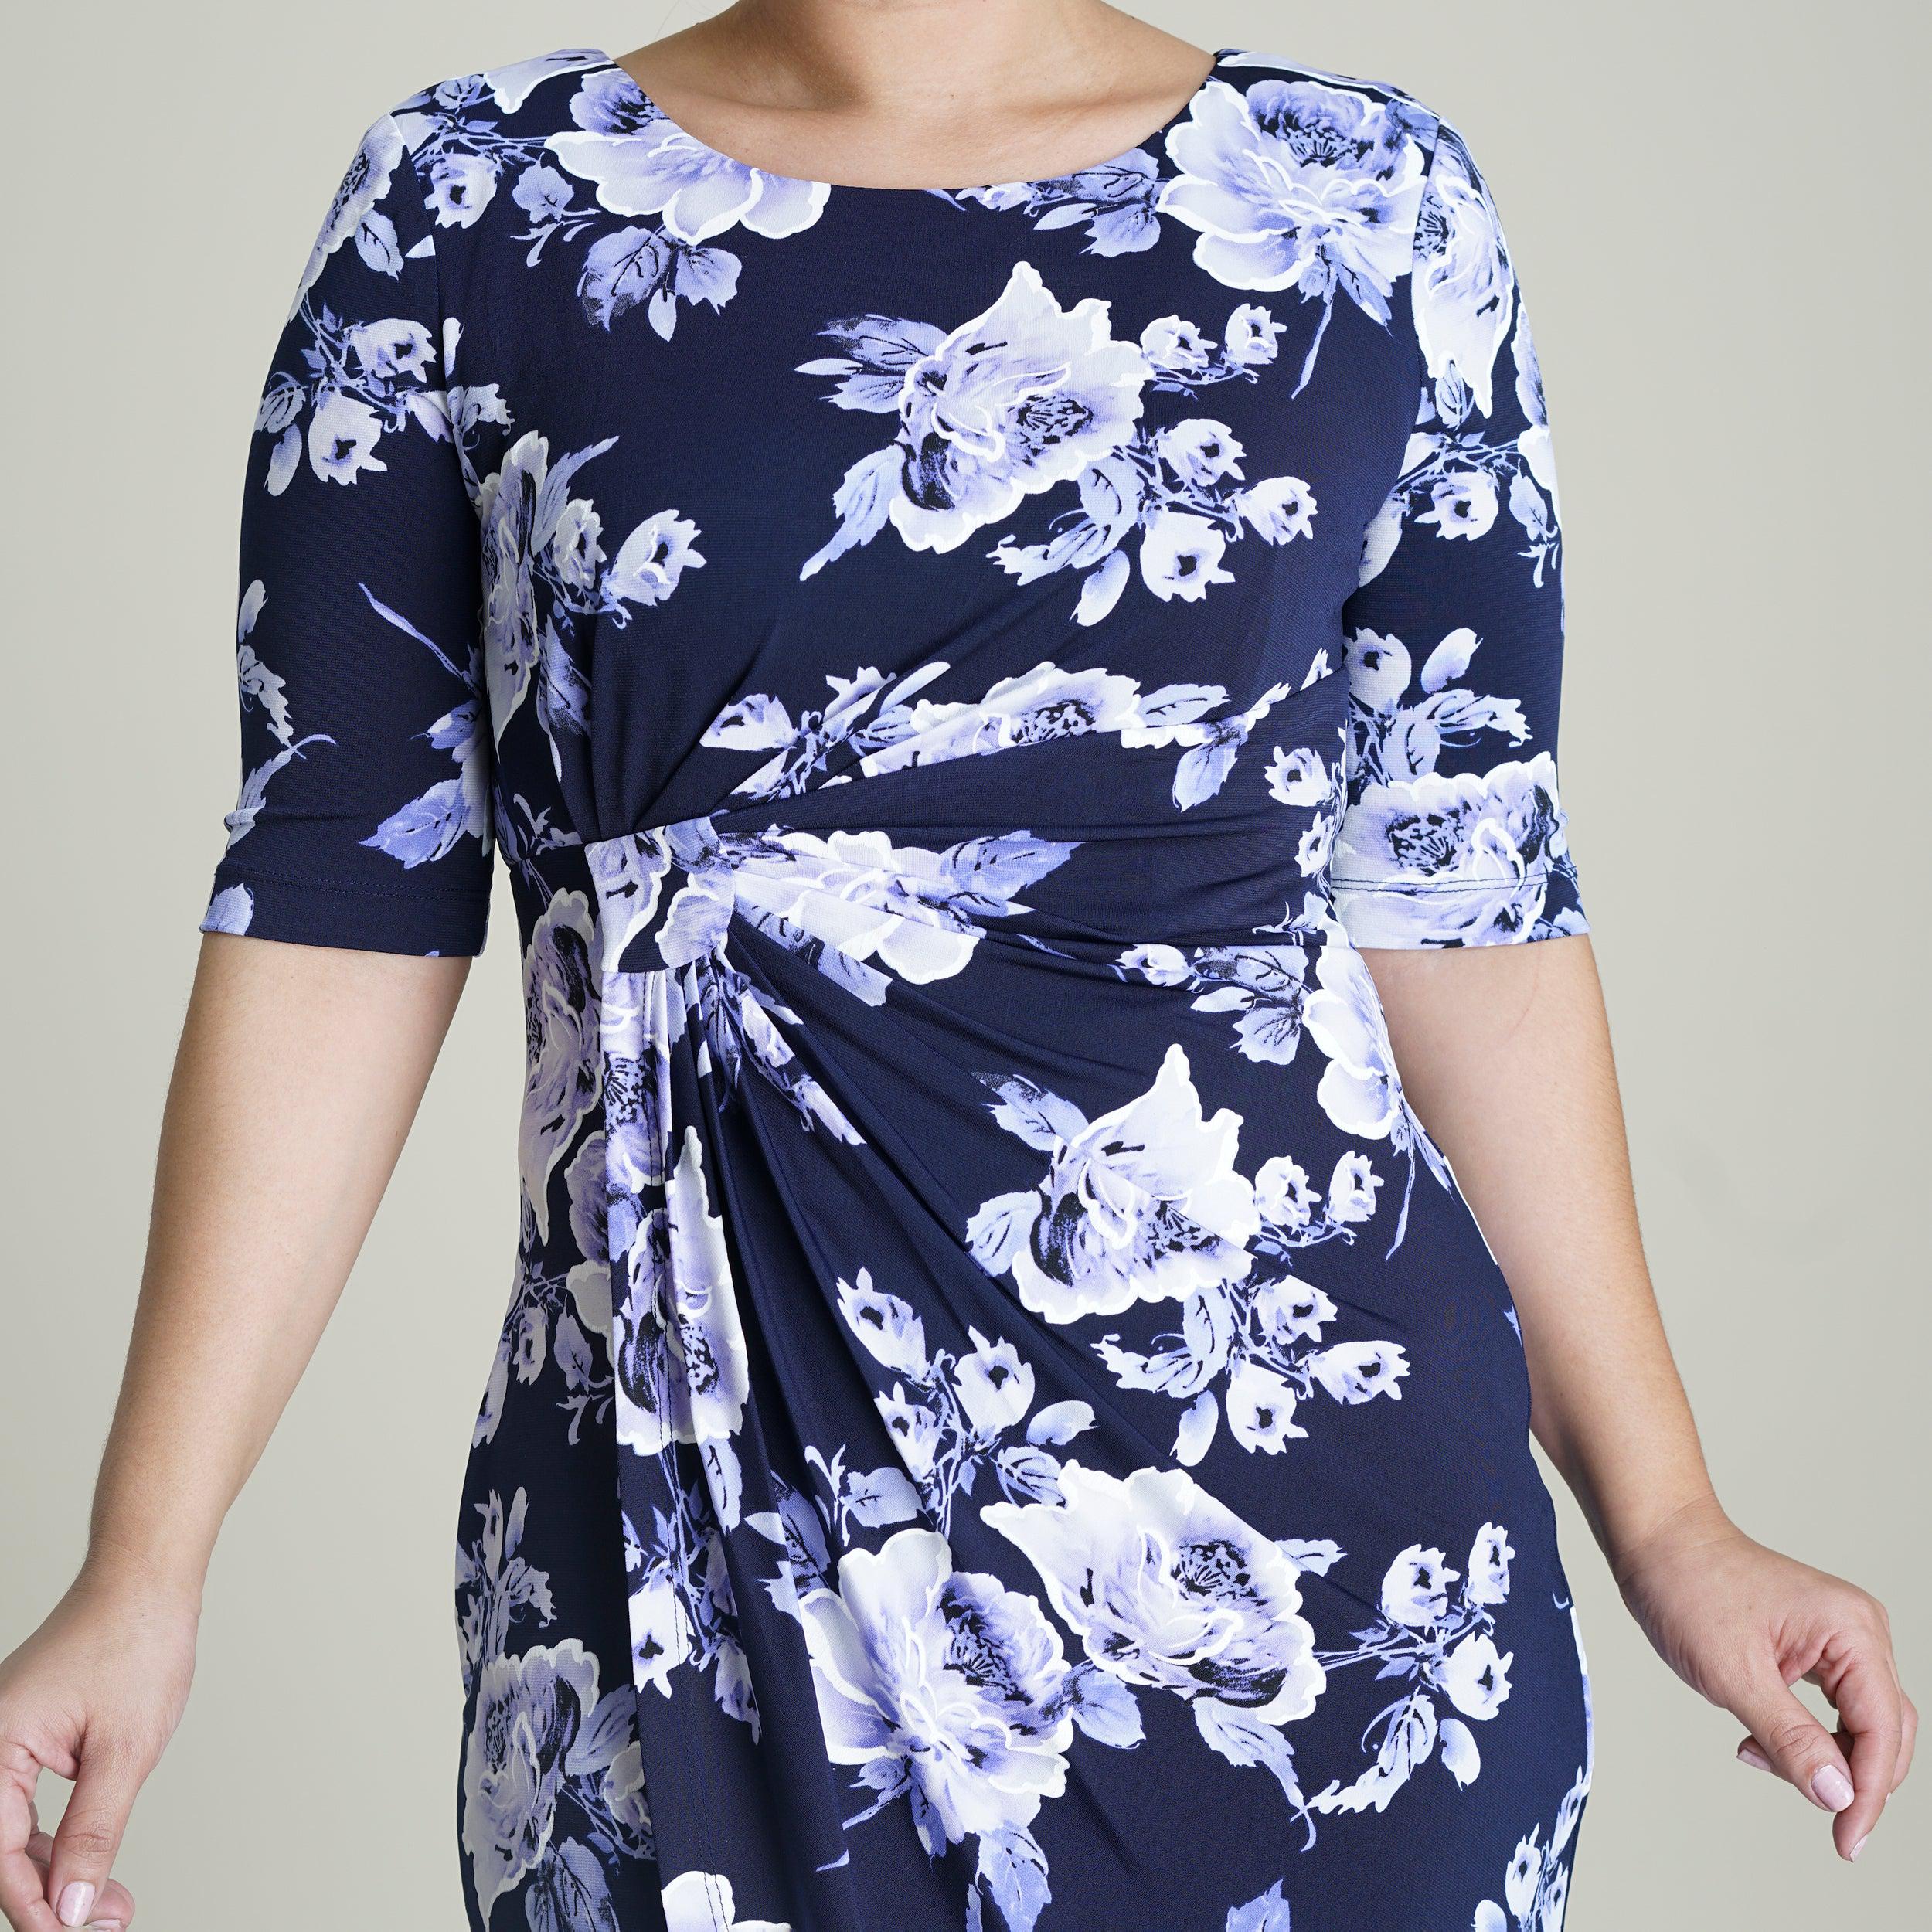 Woman posing wearing Periwinkle Lisa Periwinkle Floral Faux Wrap Dress from Connected Apparel